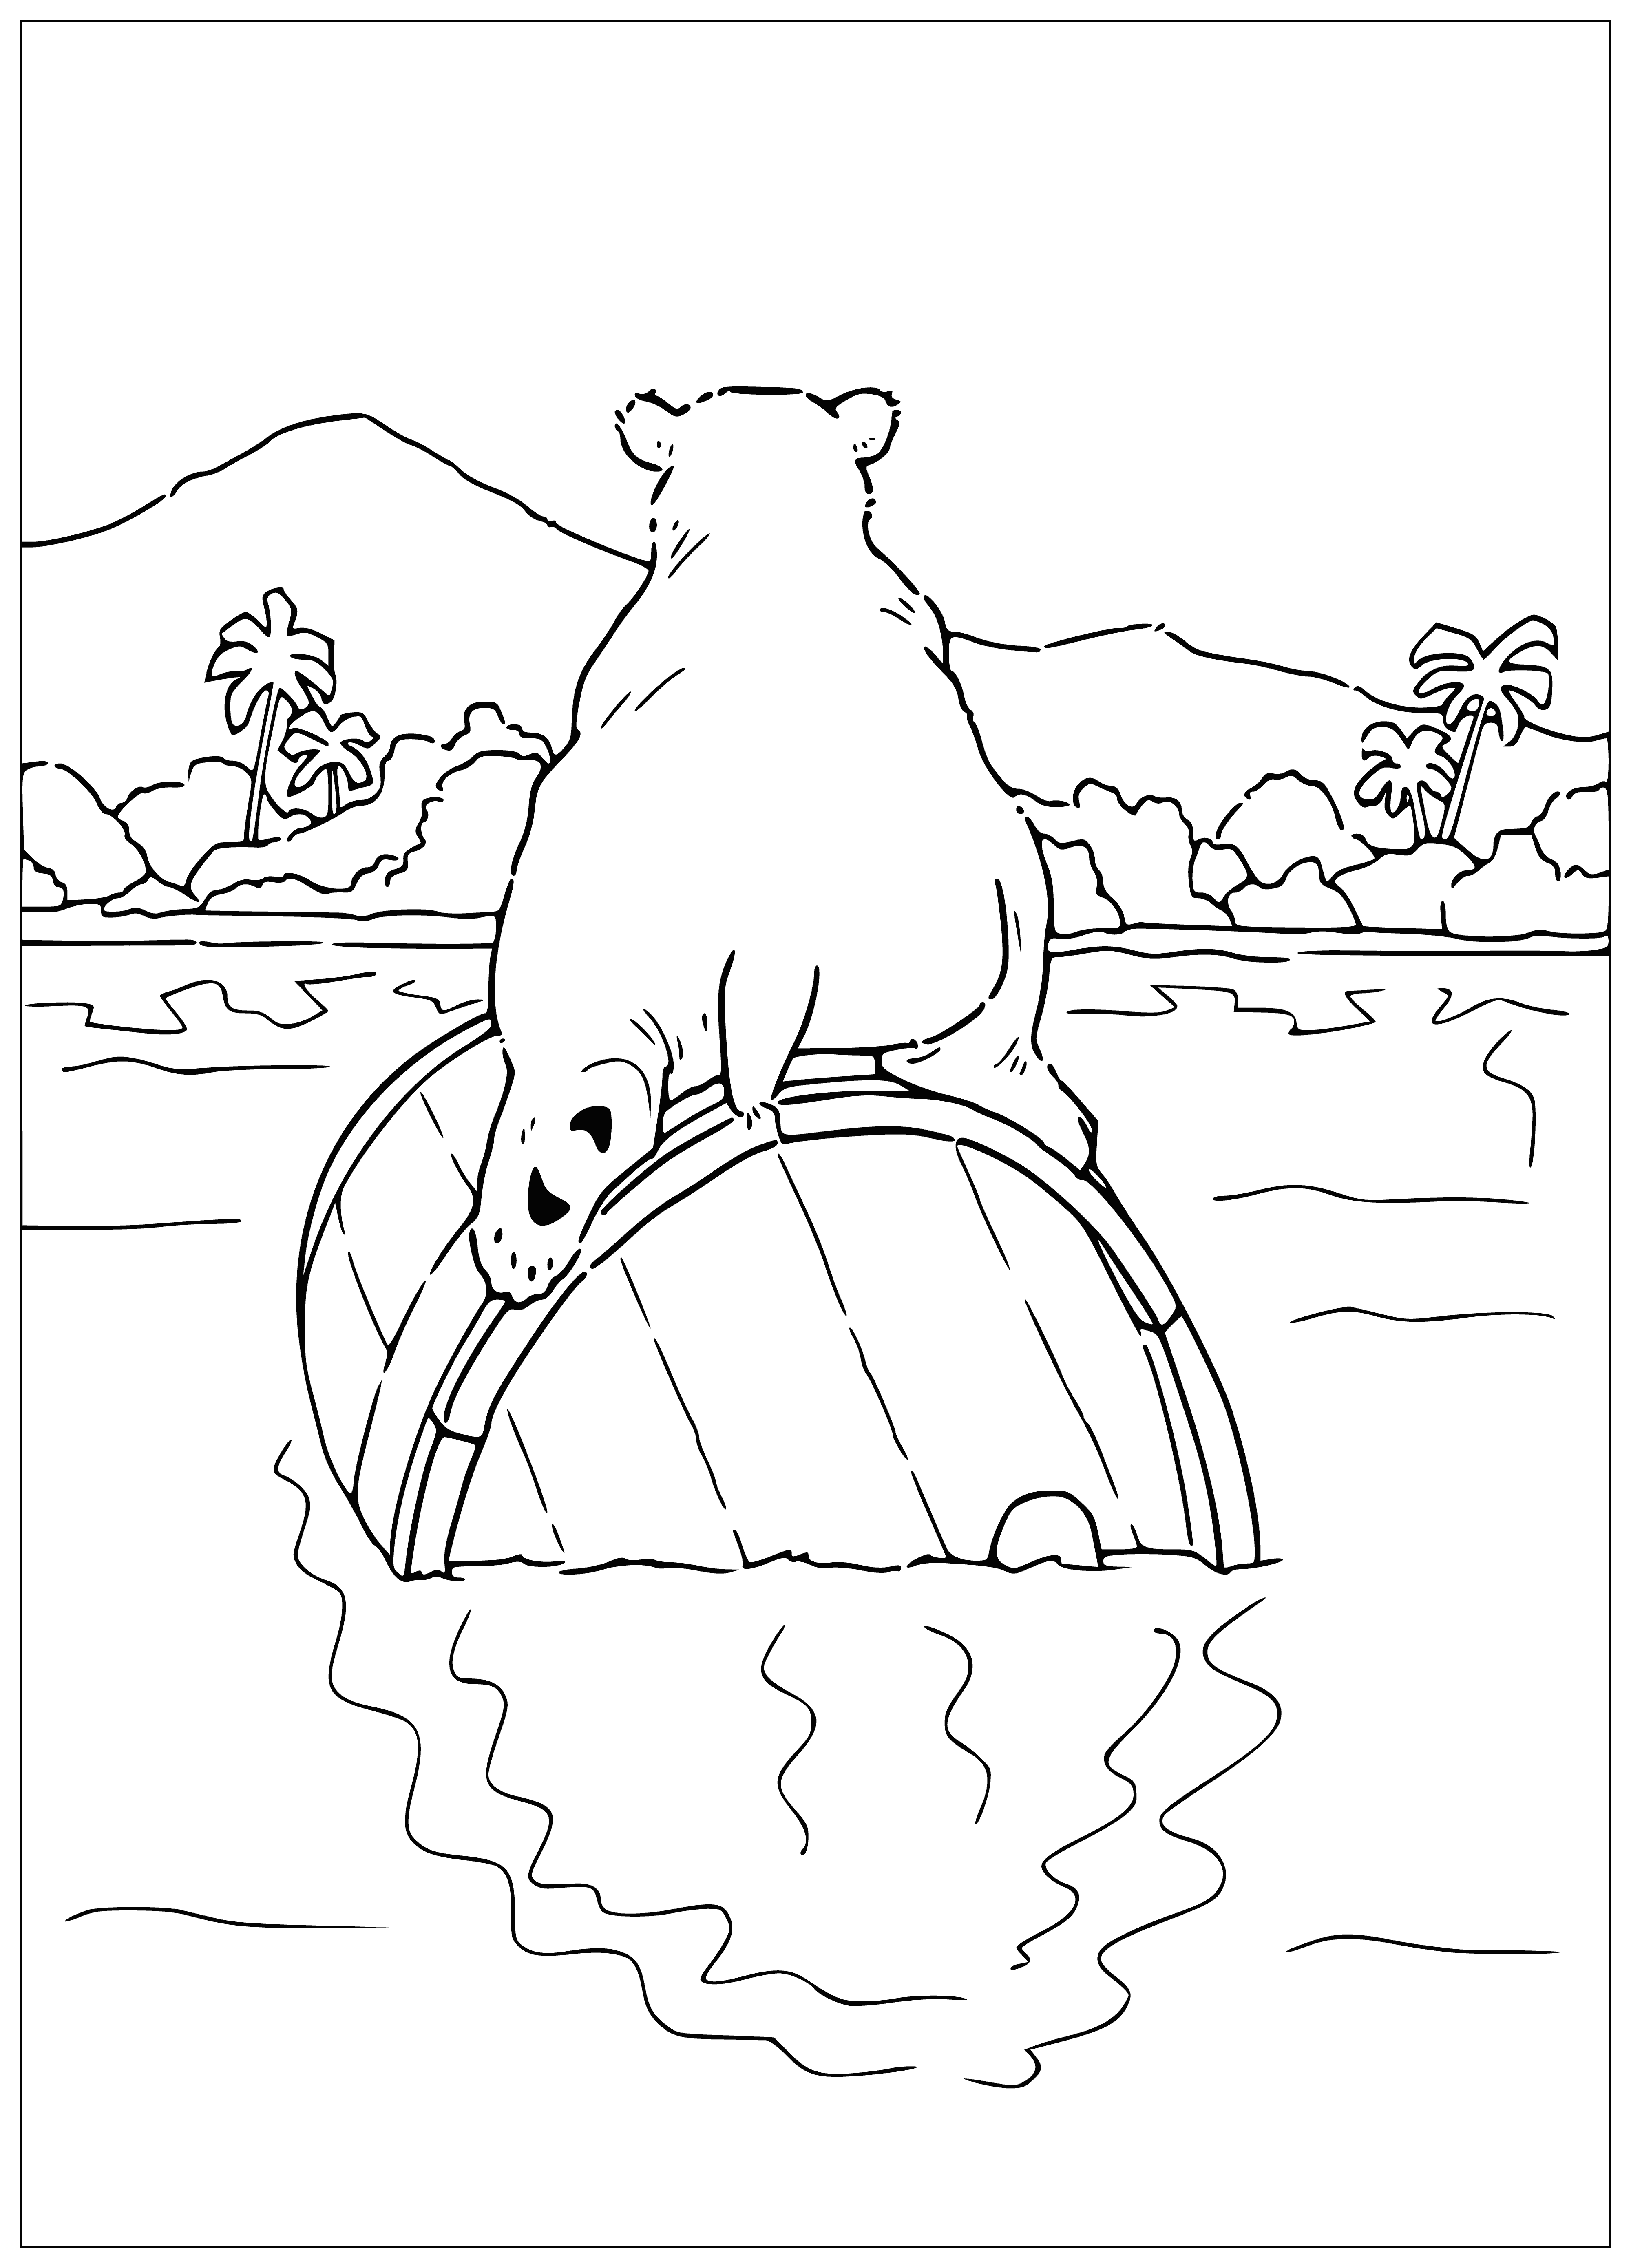 coloring page: Little polar bear Lars happily sits atop a blue barrel, arms crossed, grinning.